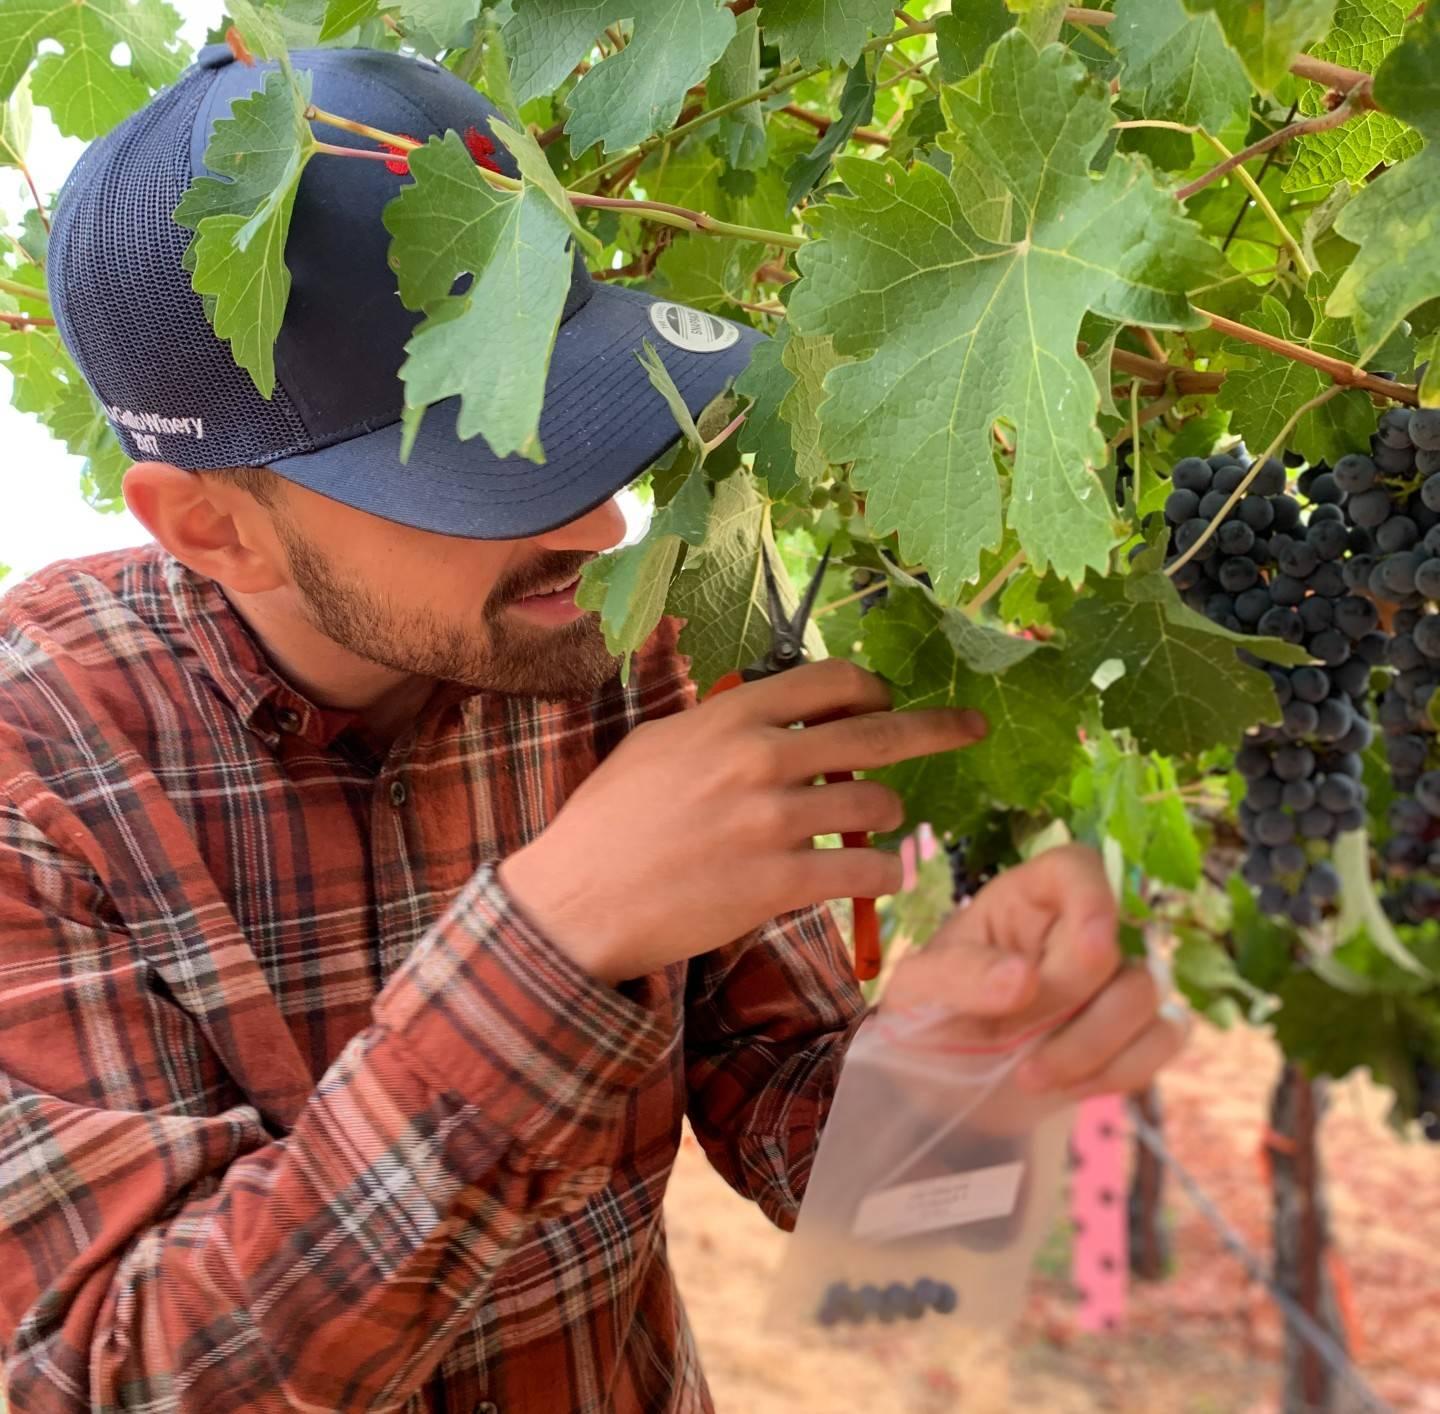 Researcher collects sample grapes in the vineyard.